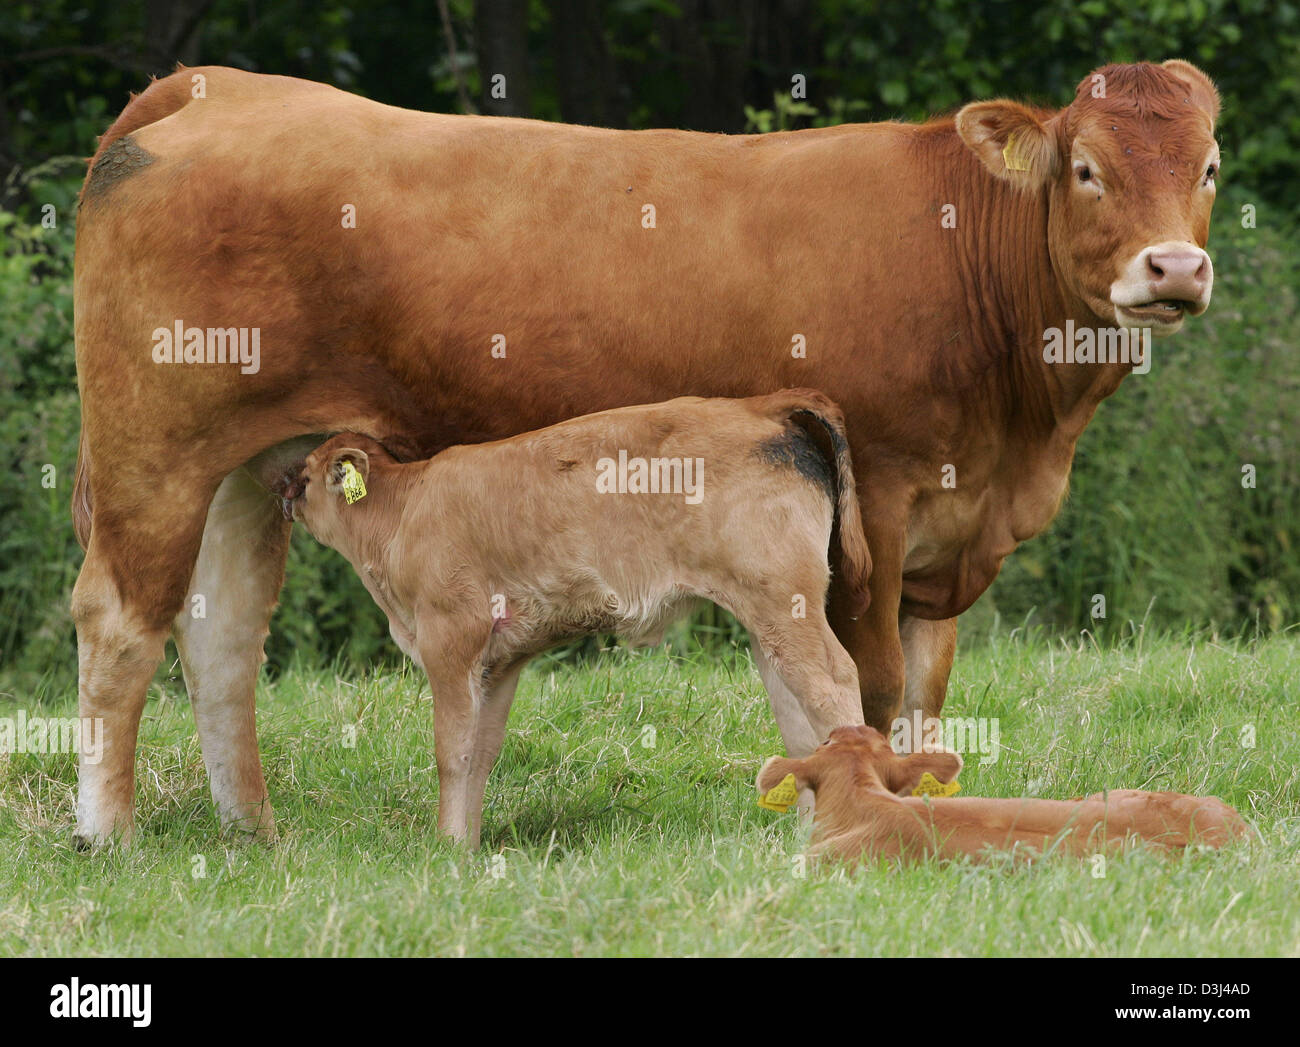 (dpa) - A brown dairy cow suckles its calf on a feedlot in Kerken, Gemany, 6 June 2005. Stock Photo